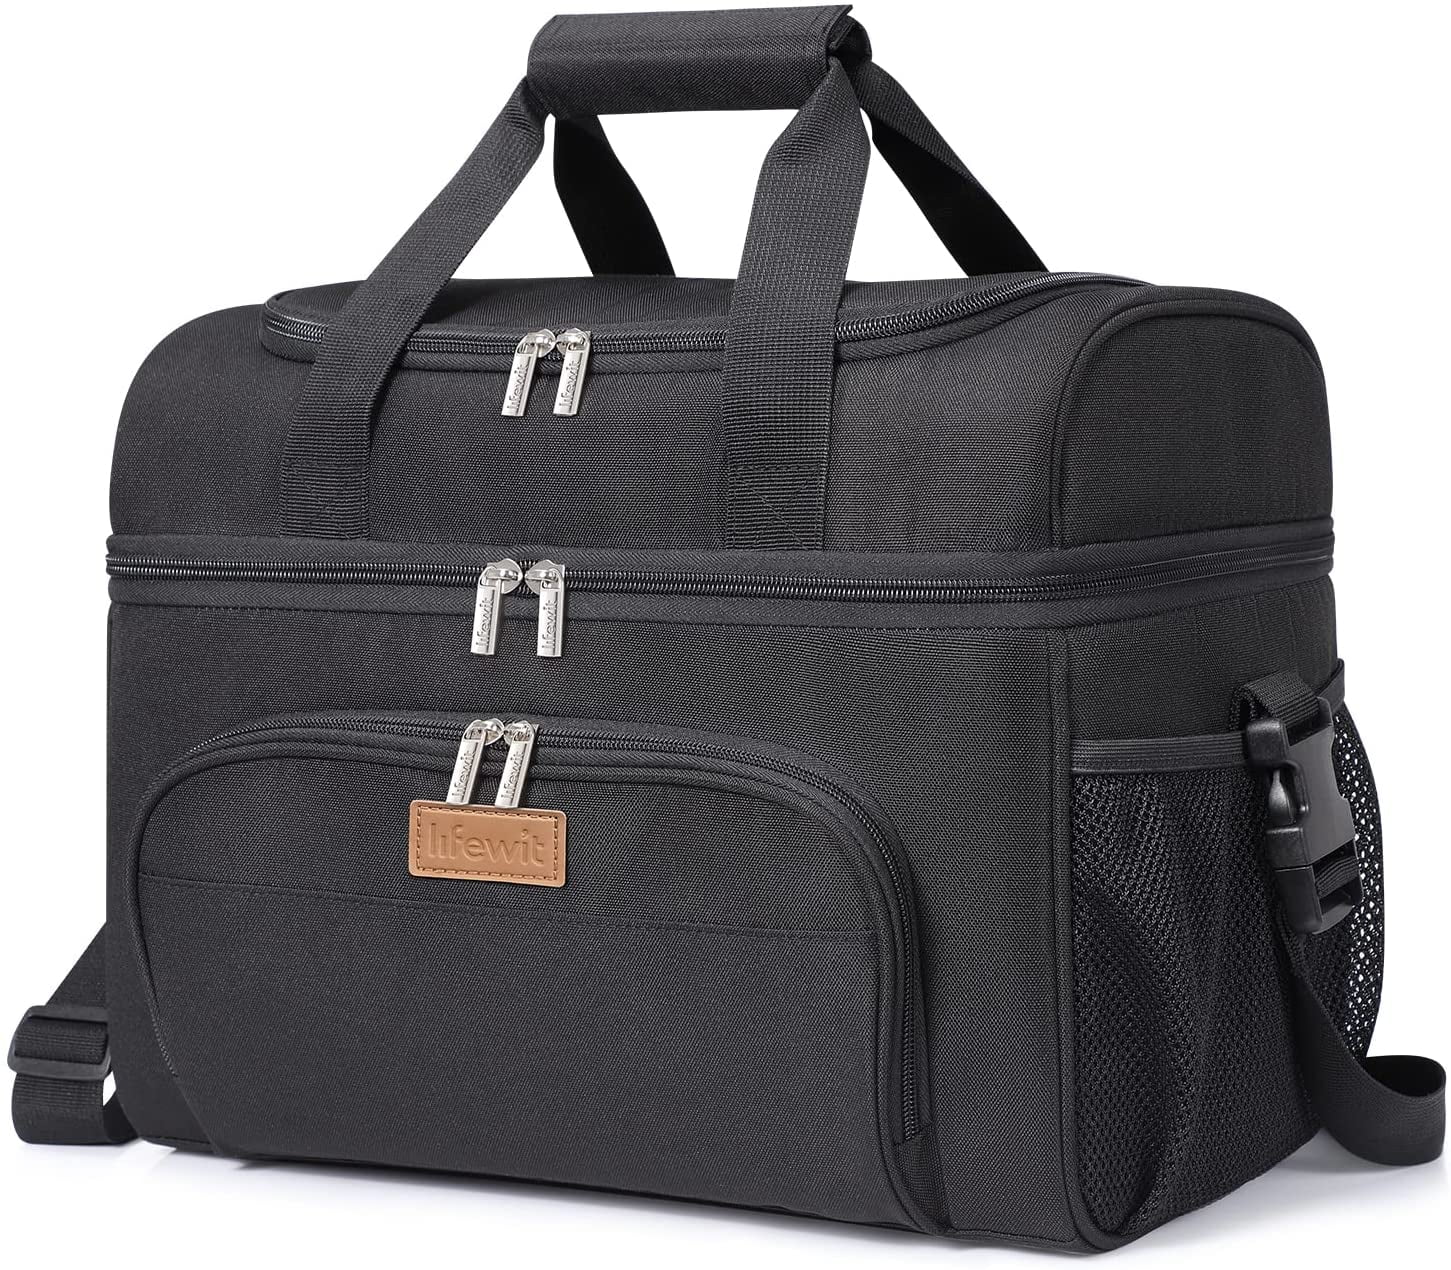 Lifewit 32 Can Soft Cooler Bag Lightweight Portable Cooler Tote Double  Layer, Black